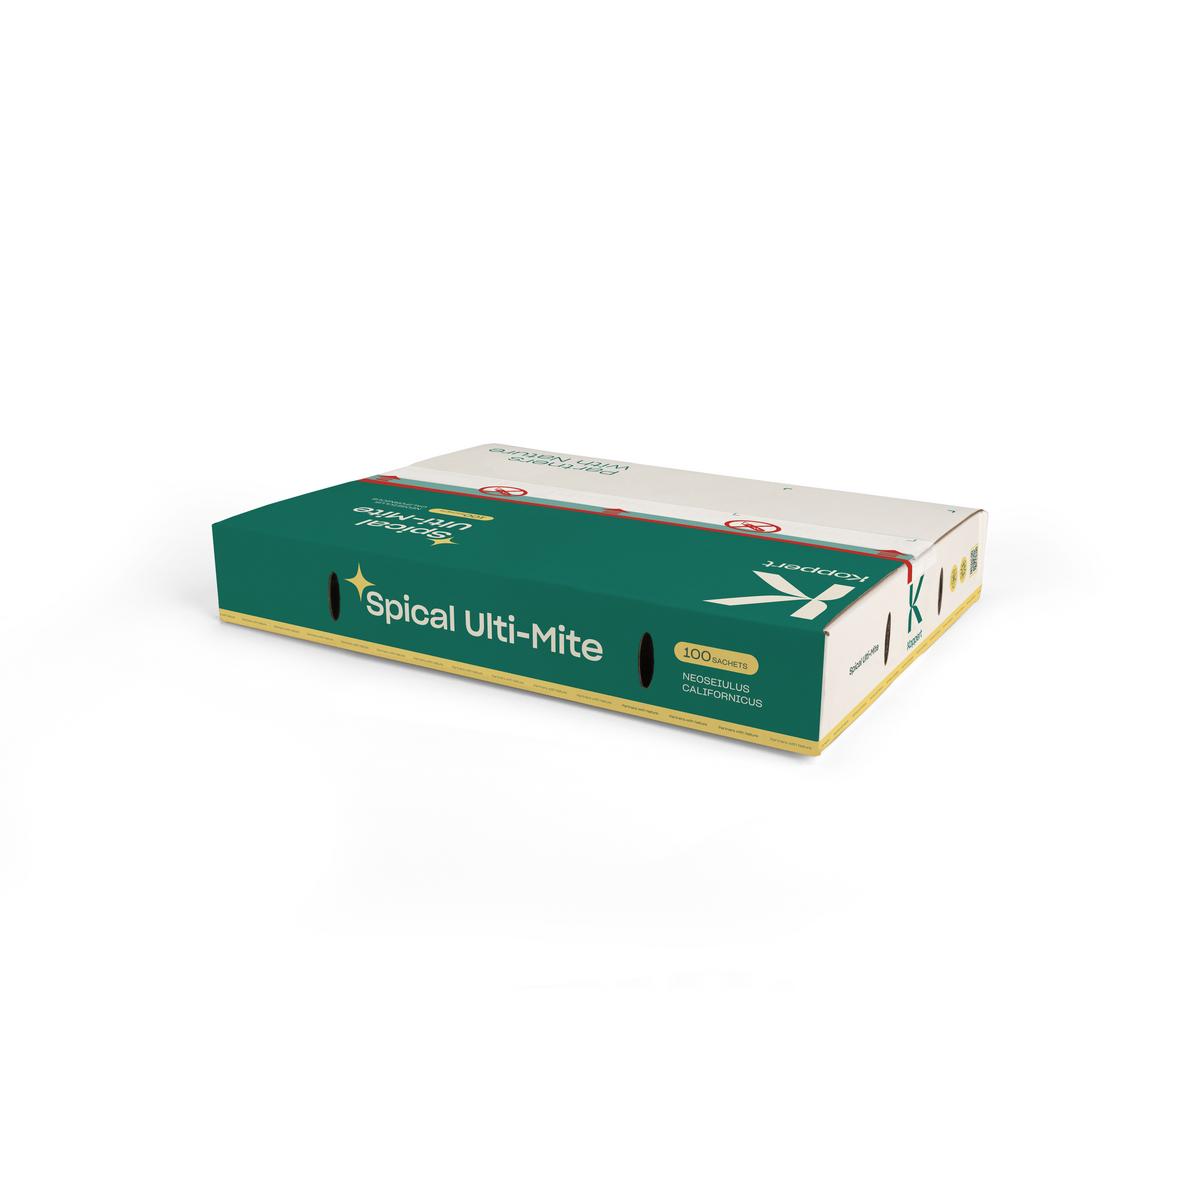 Smaller size of spical ulti-mite box, 100g, green and white